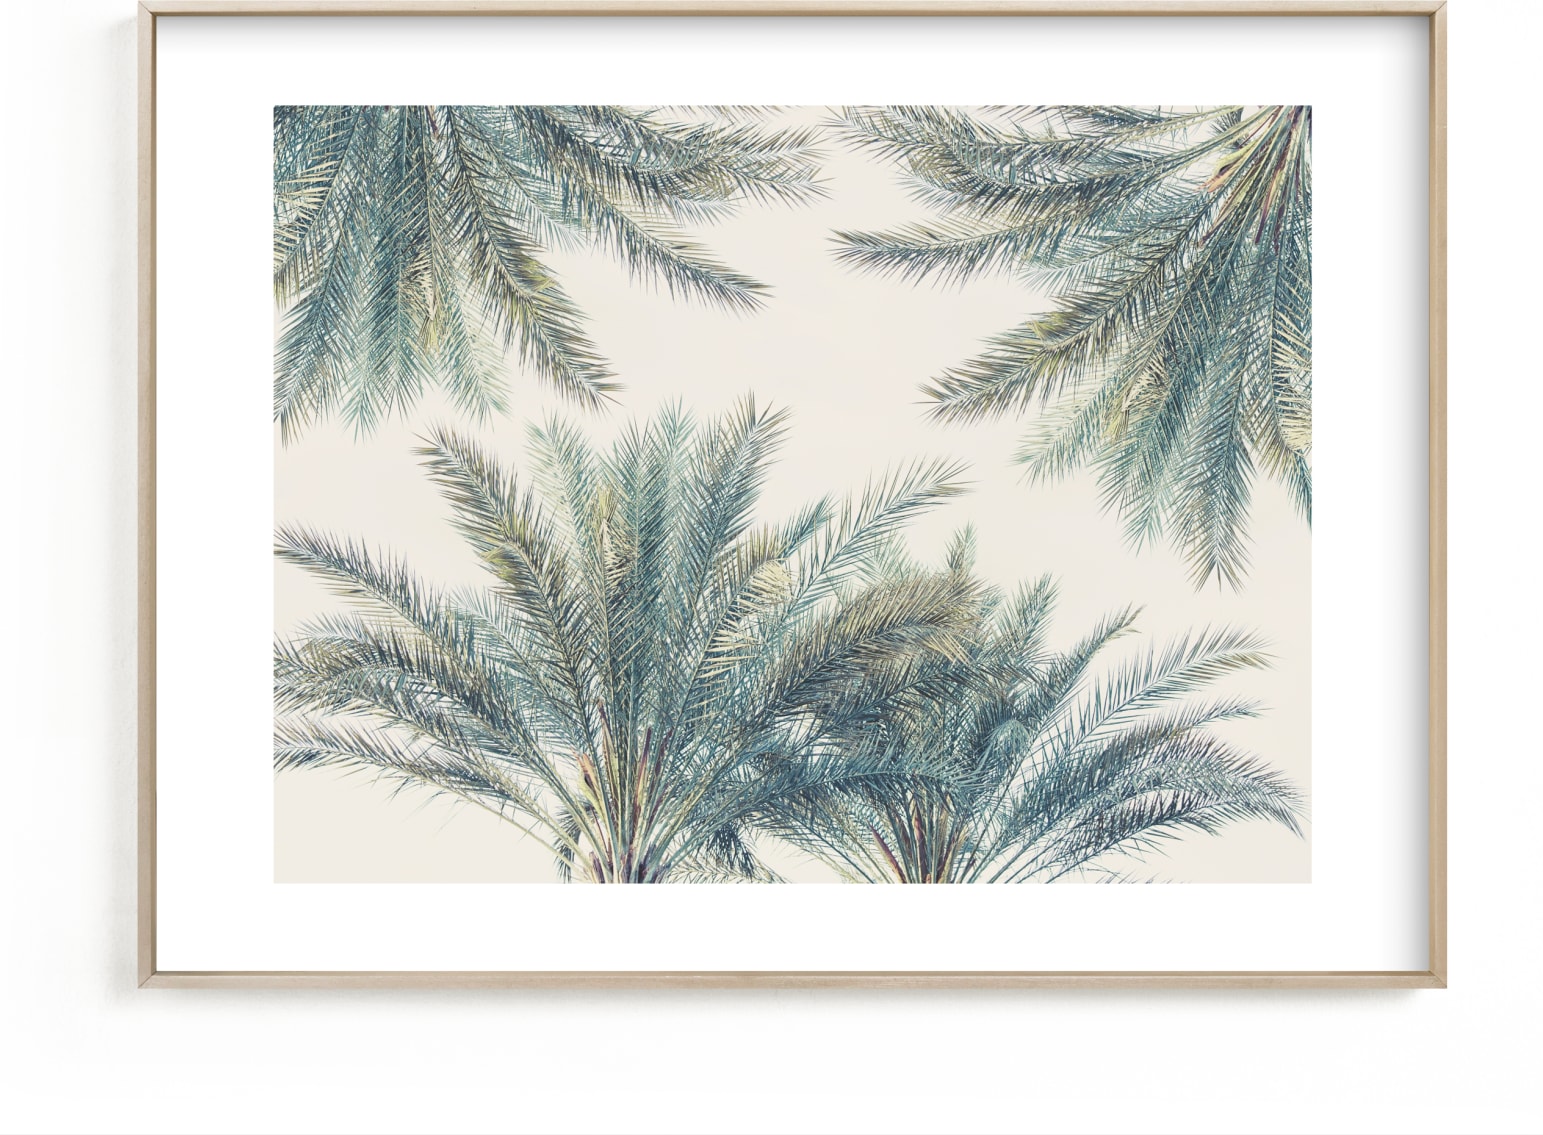 This is a beige, green kids wall art by Irene Suchocki called Fronds in High Places.